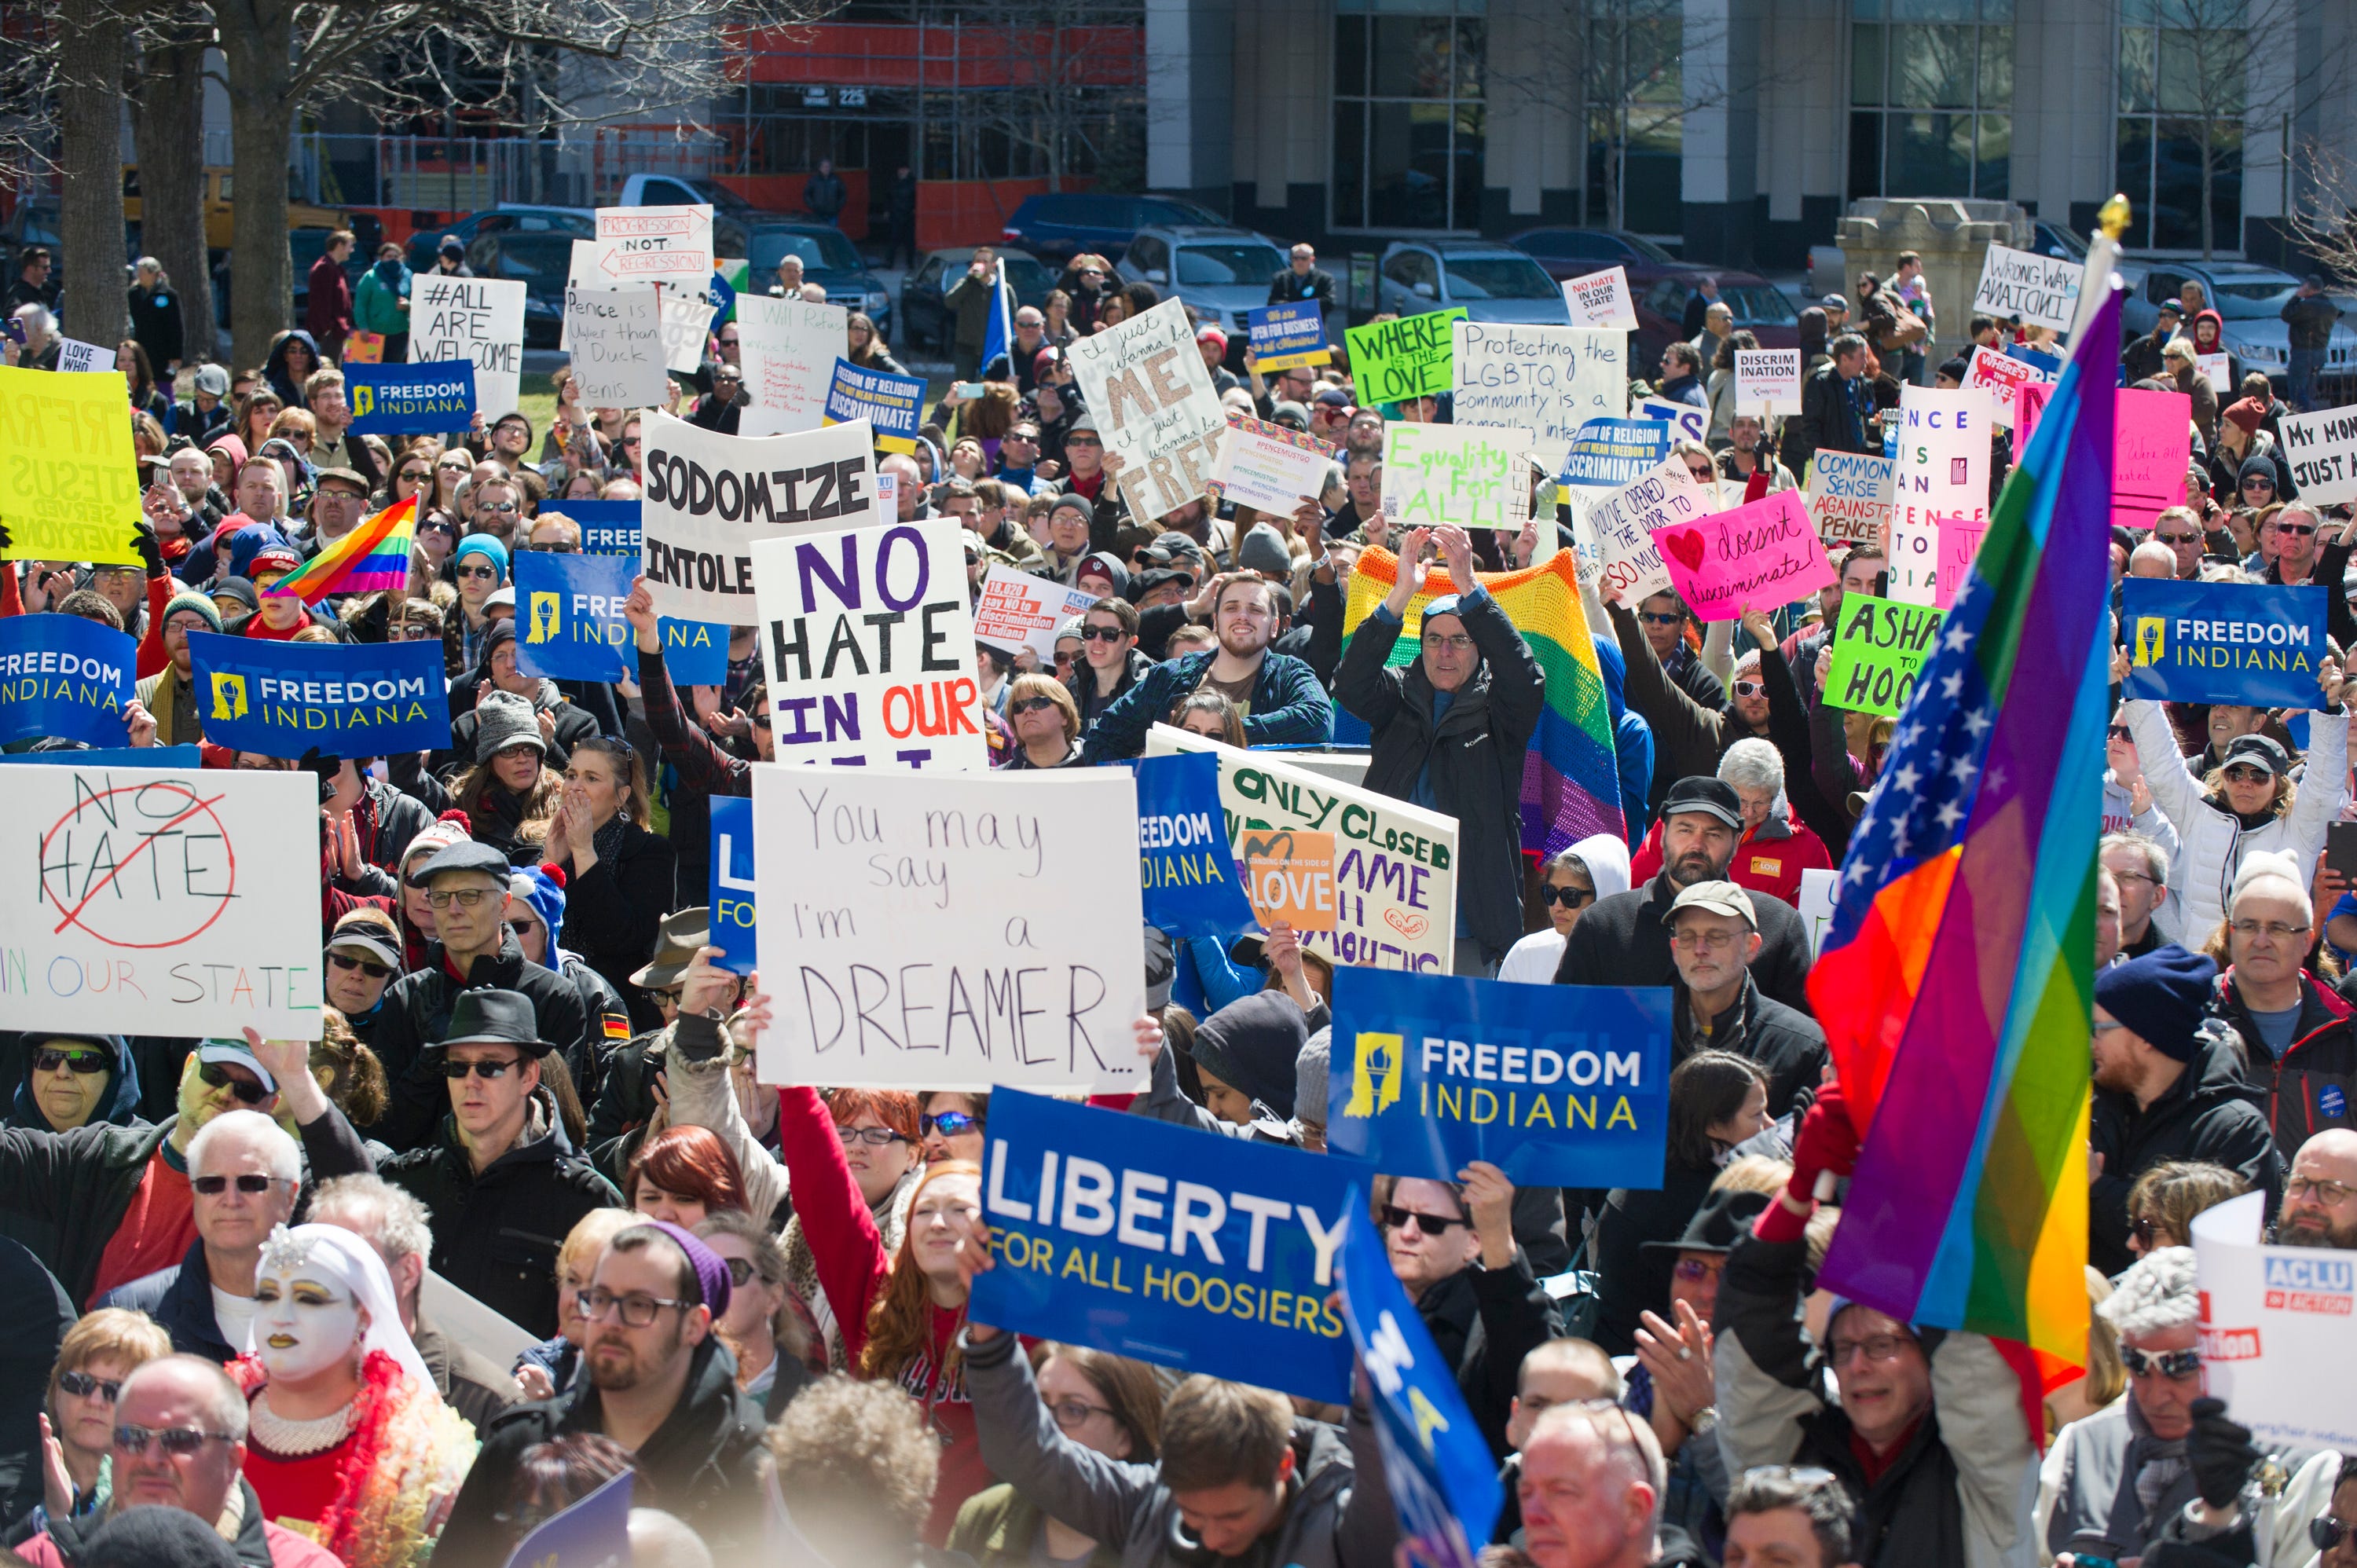 9 CEOs call on Indiana to modify religious freedom law